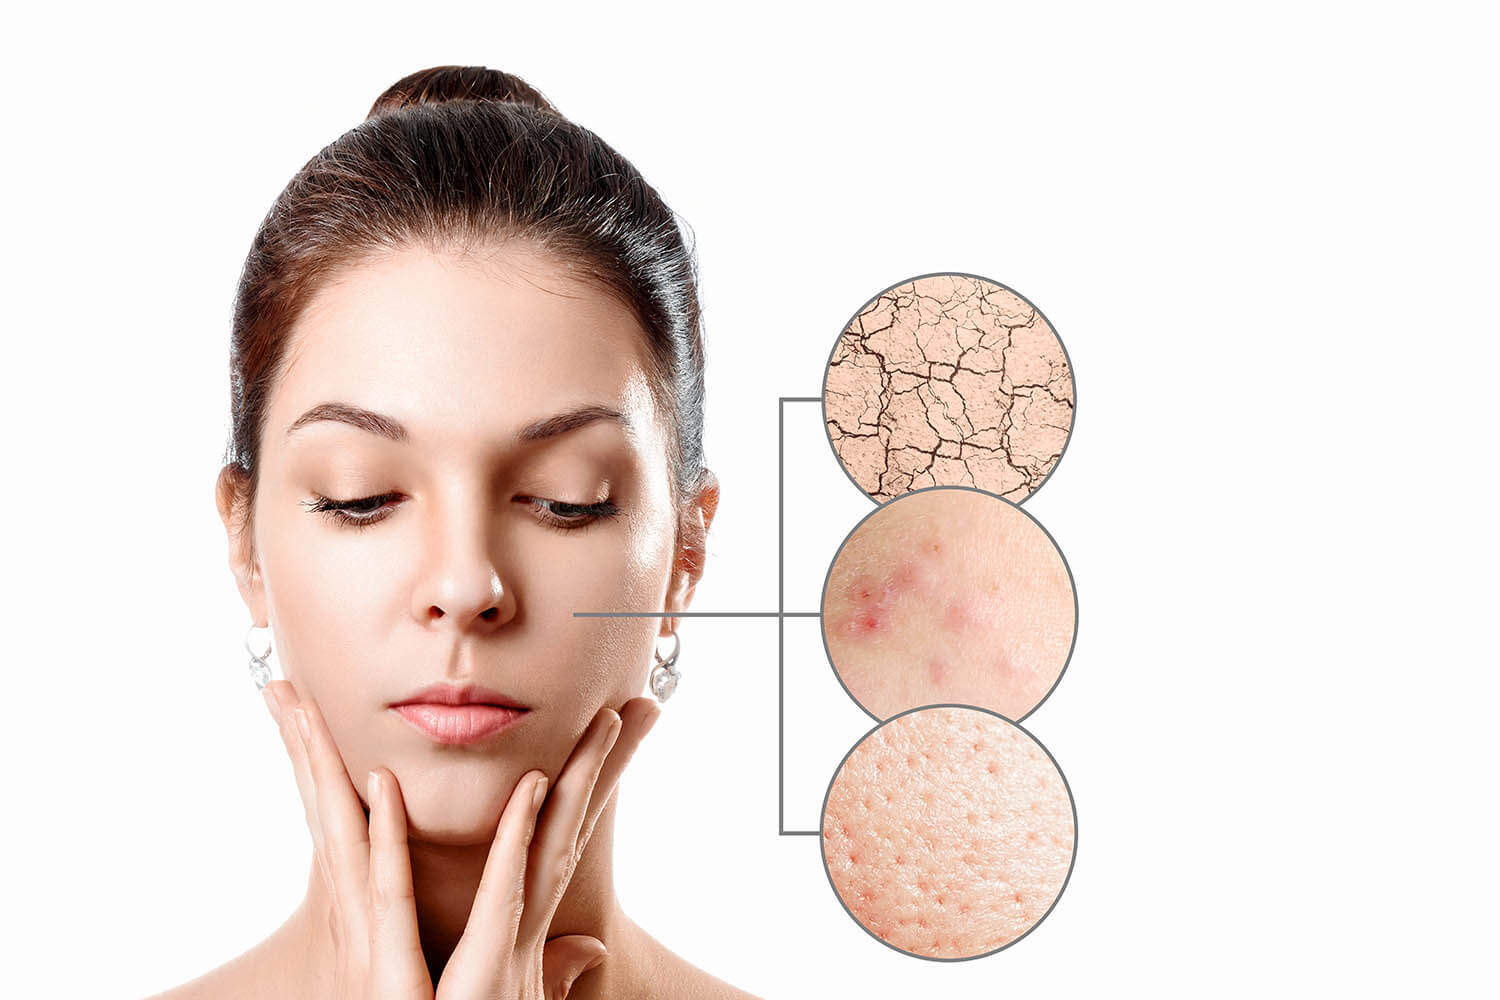 What Causes Acne on Forehead, Shoulders, Back, Neck, Chest